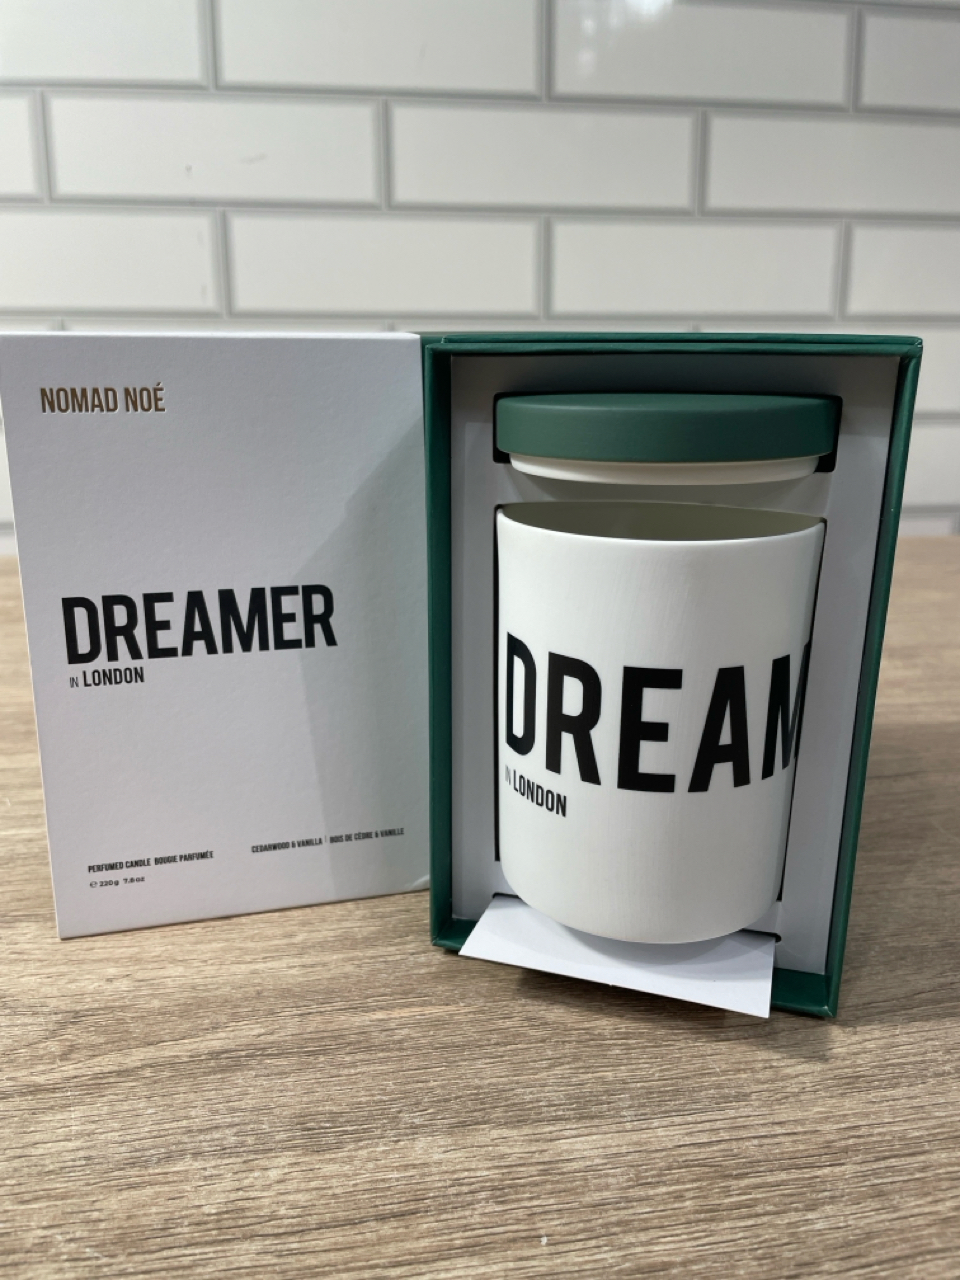 Dreamer Scented Candle from Nomad Noe - Image 2 of 4